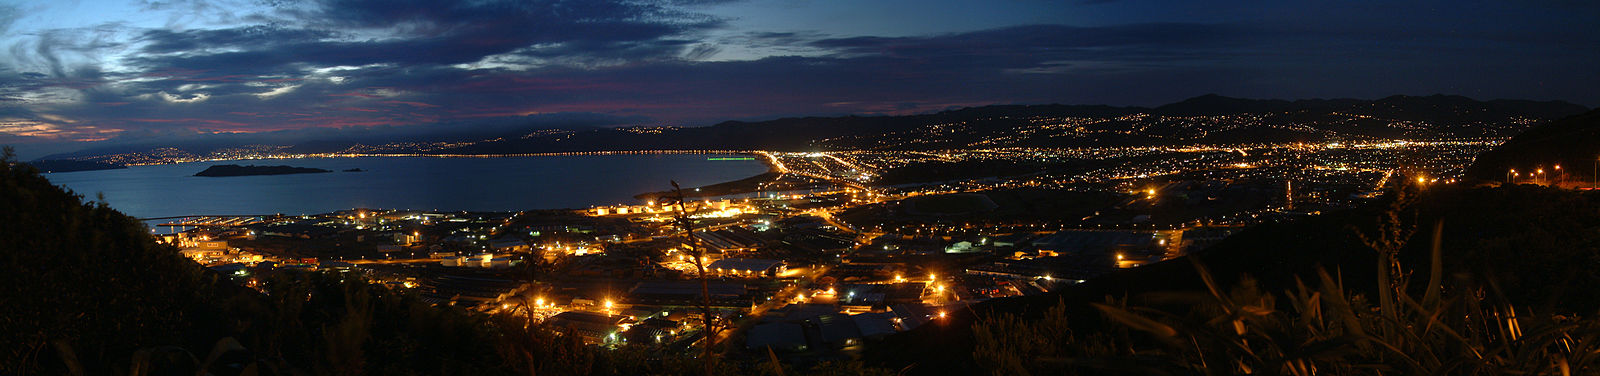 Wellington Harbour and southern Lower Hutt from the top of the Wainuiomata Hill Road (south of the above photo), looking west. Matiu / Somes Island is in the harbour on the left (South), and beyond that the row of lights along State Highway 2, marking the line of the geologic fault, both of which continue up the far side of the valley to the right. The industrial area in the central foreground is Gracefield. In the distance, behind Matiu / Somes Island, are Wellington port and CBD.